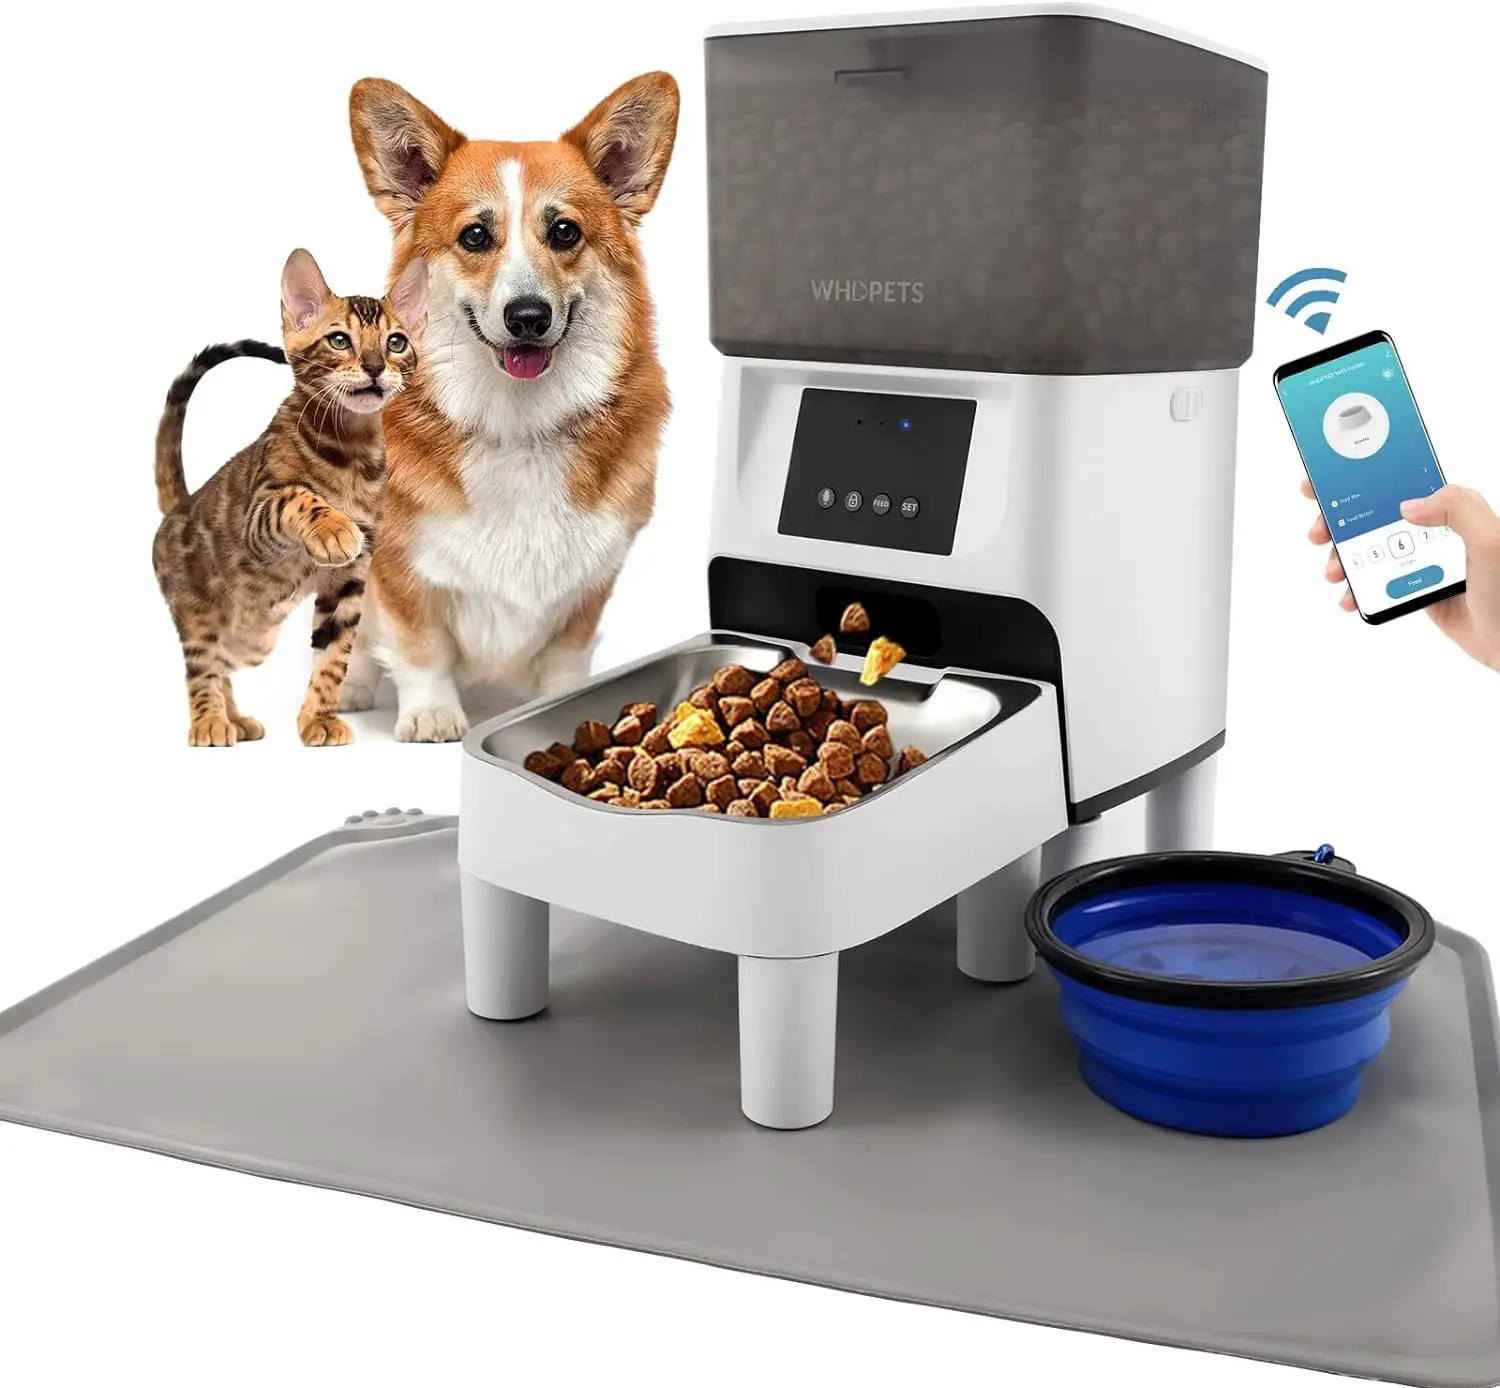 Automatic Cat Feeder, WHDPETS 4L WiFi Automatic Cat Food Dispenser with App Control Elevated Dog Feeder with Stainless Steel Bowl, Silicone Dog Bowl, Feeding Mat, 10s Voice Recorder(2.4G WiFi Only)